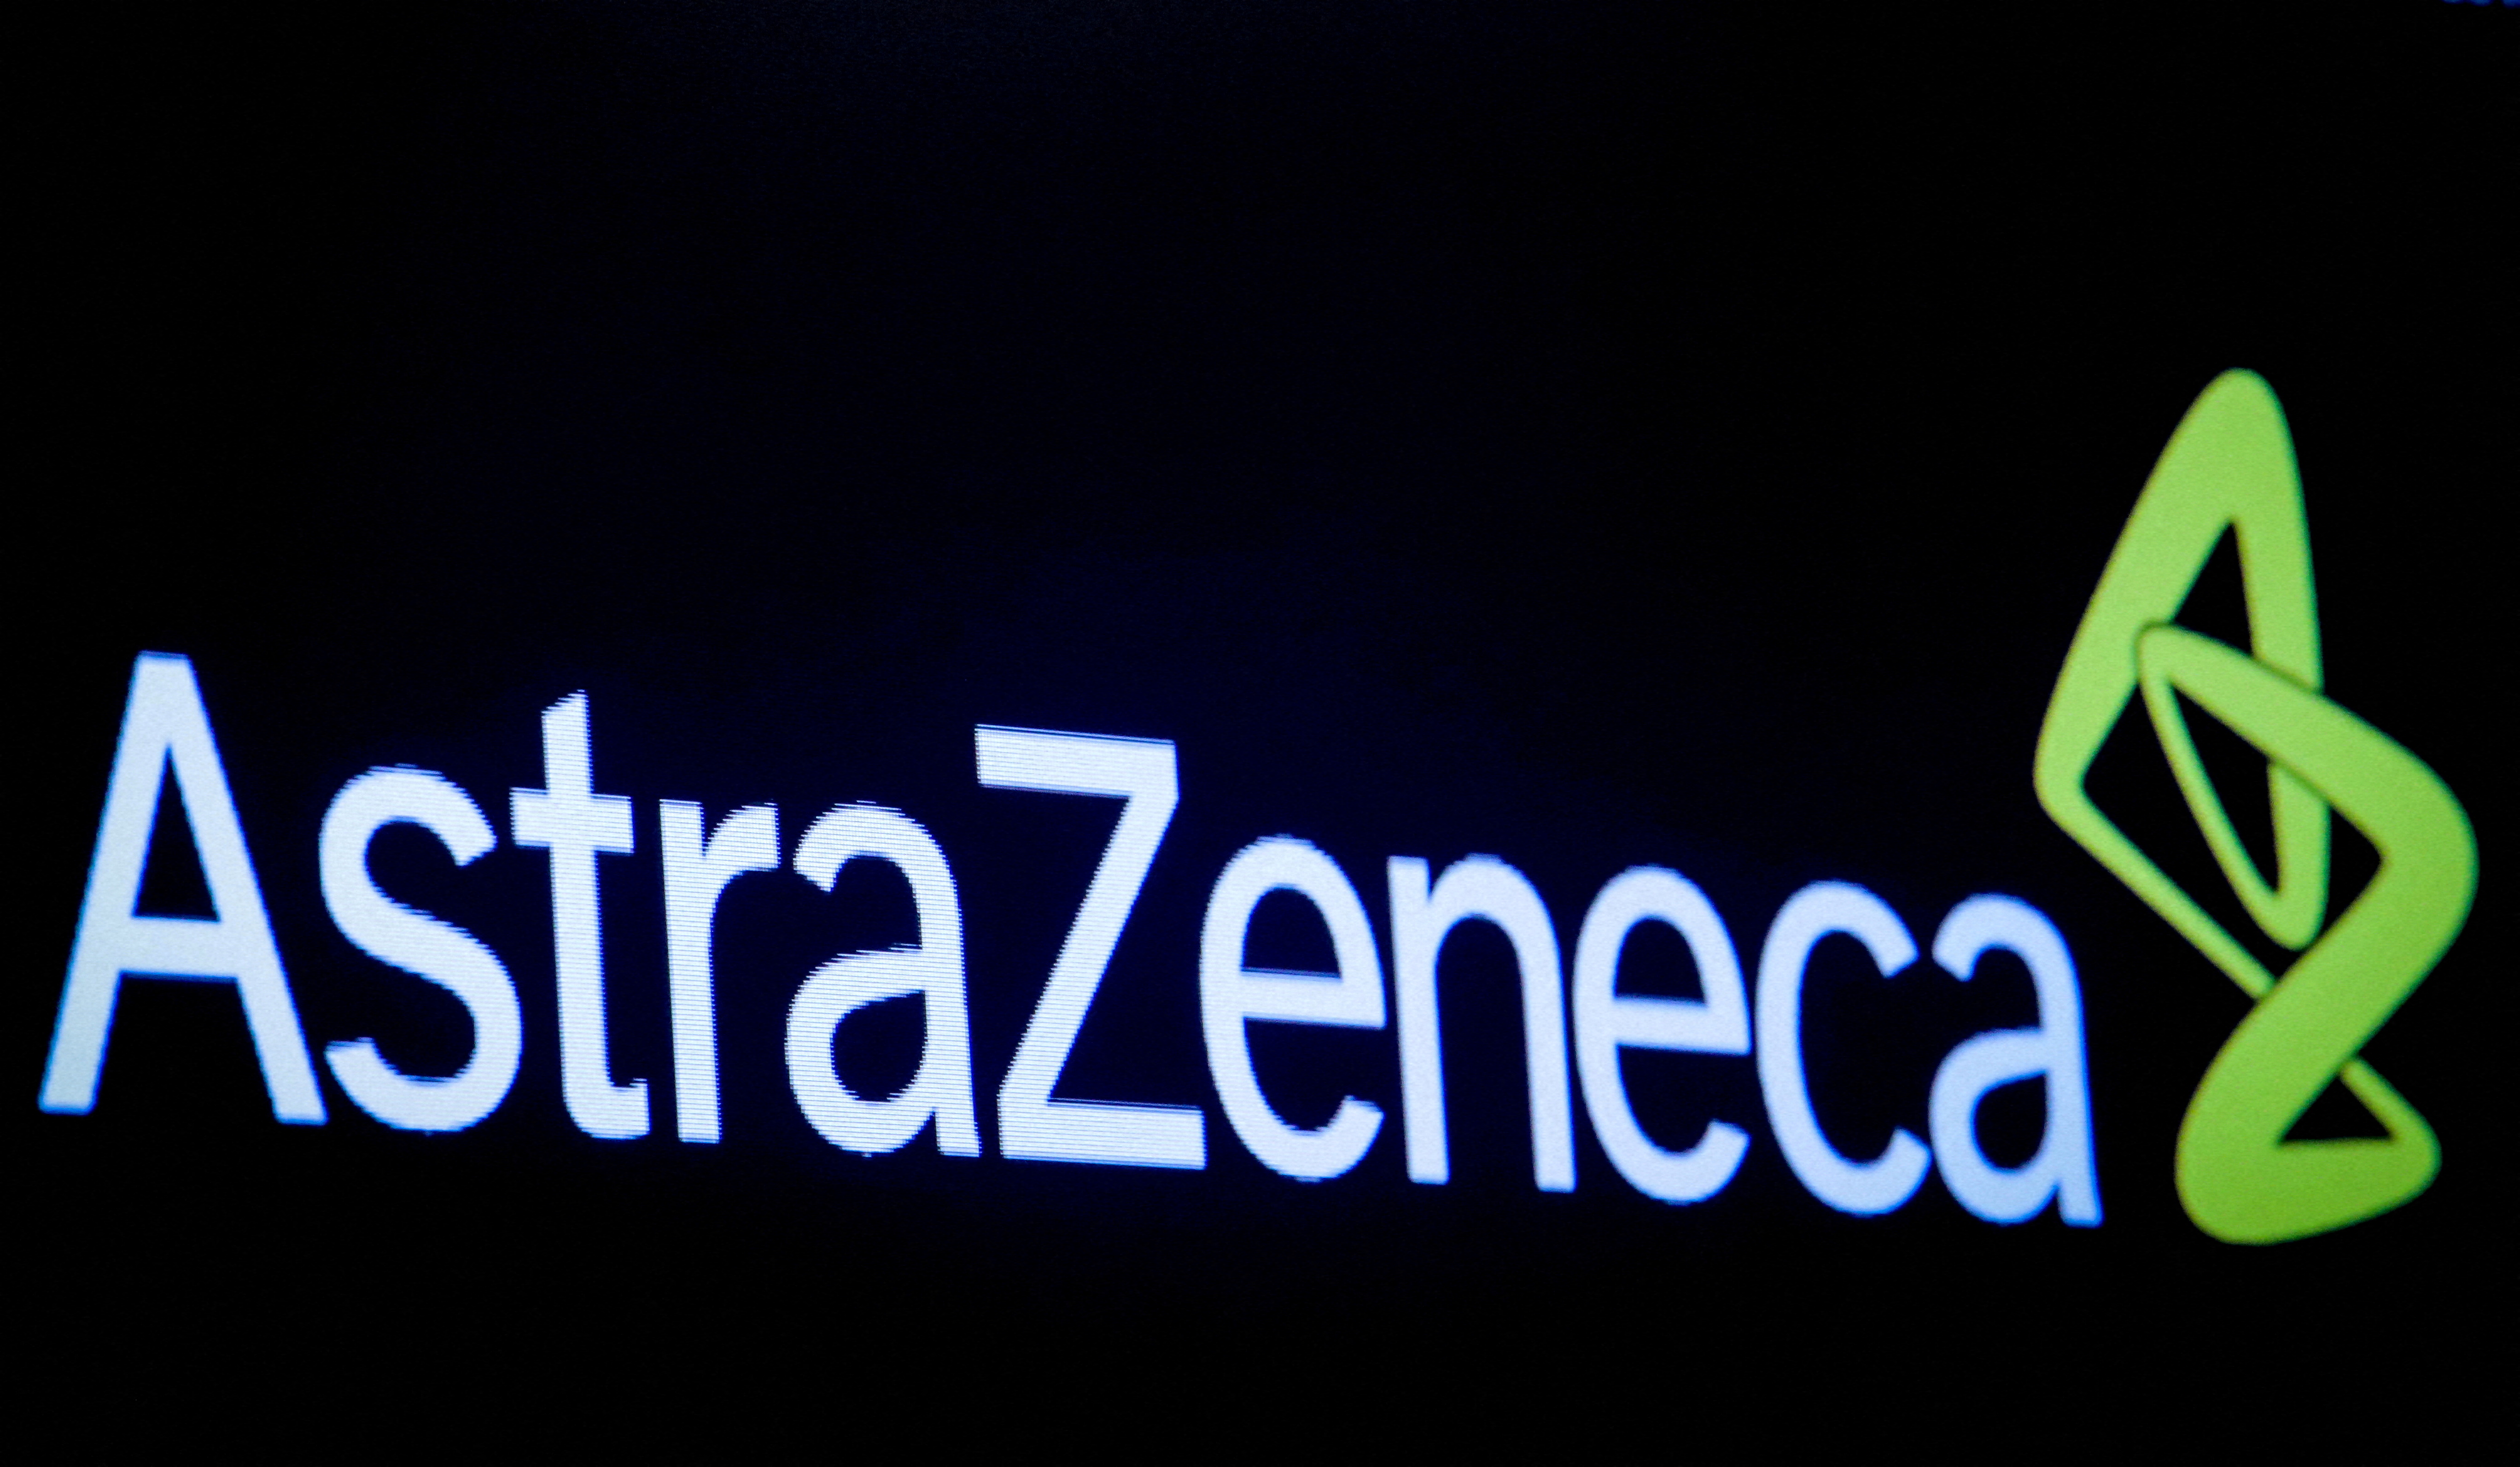 The company logo for pharmaceutical company AstraZeneca is displayed on a screen on the floor at the NYSE in New York